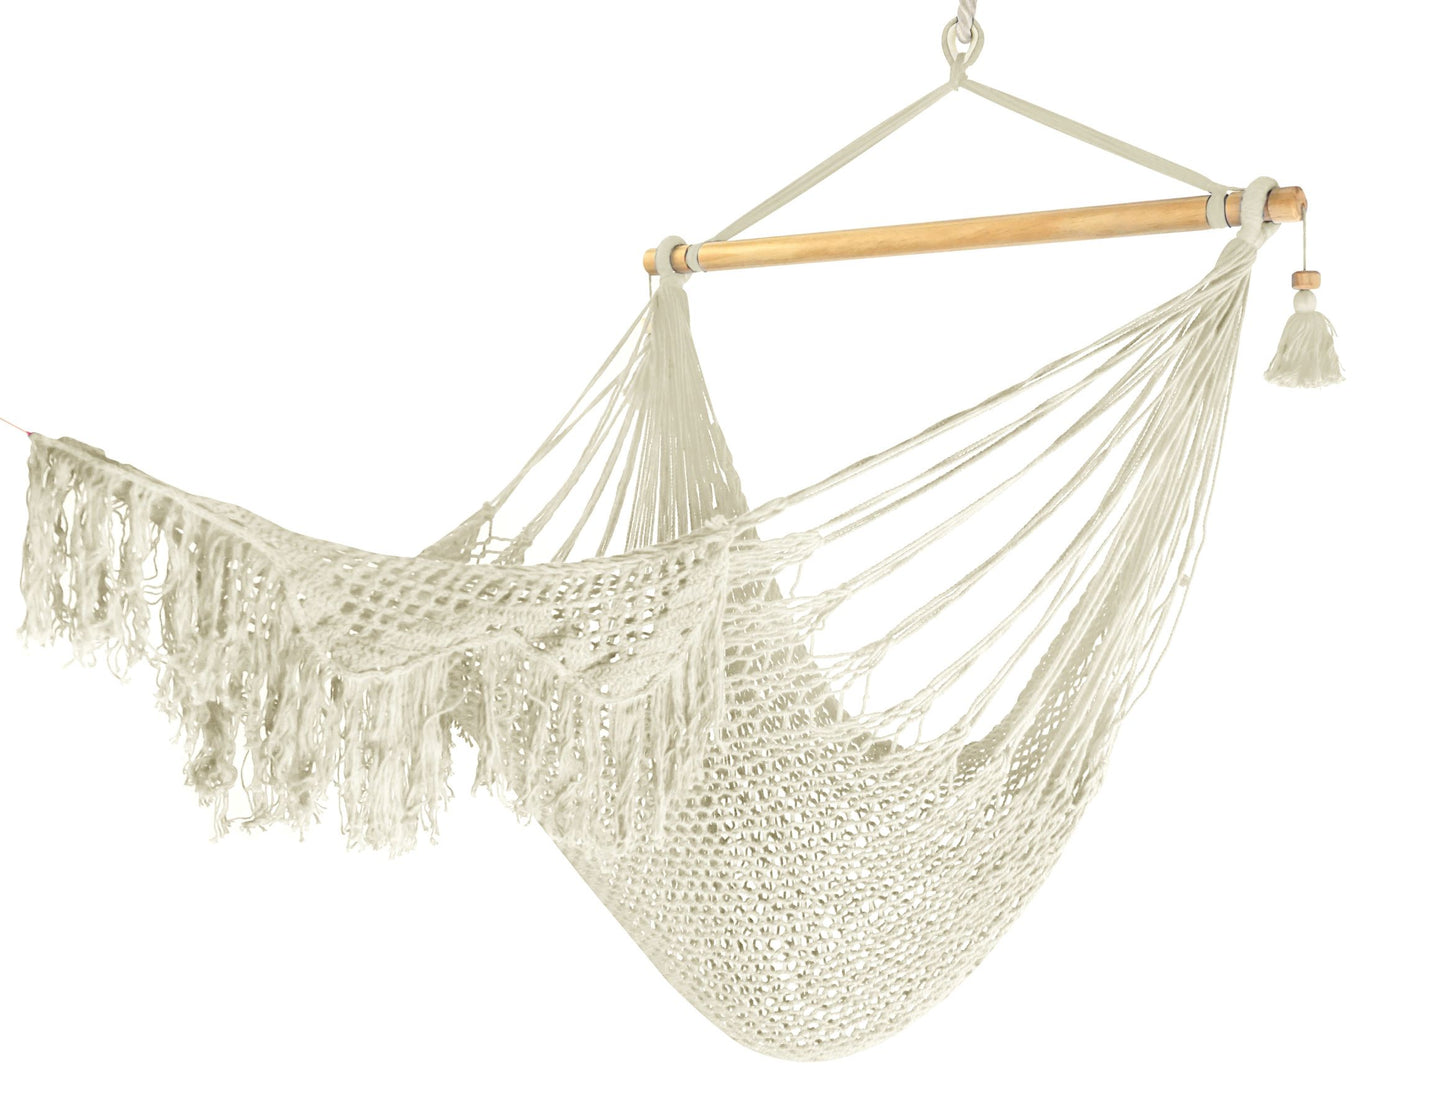 Off White Woven Hanging Chair for Indoor